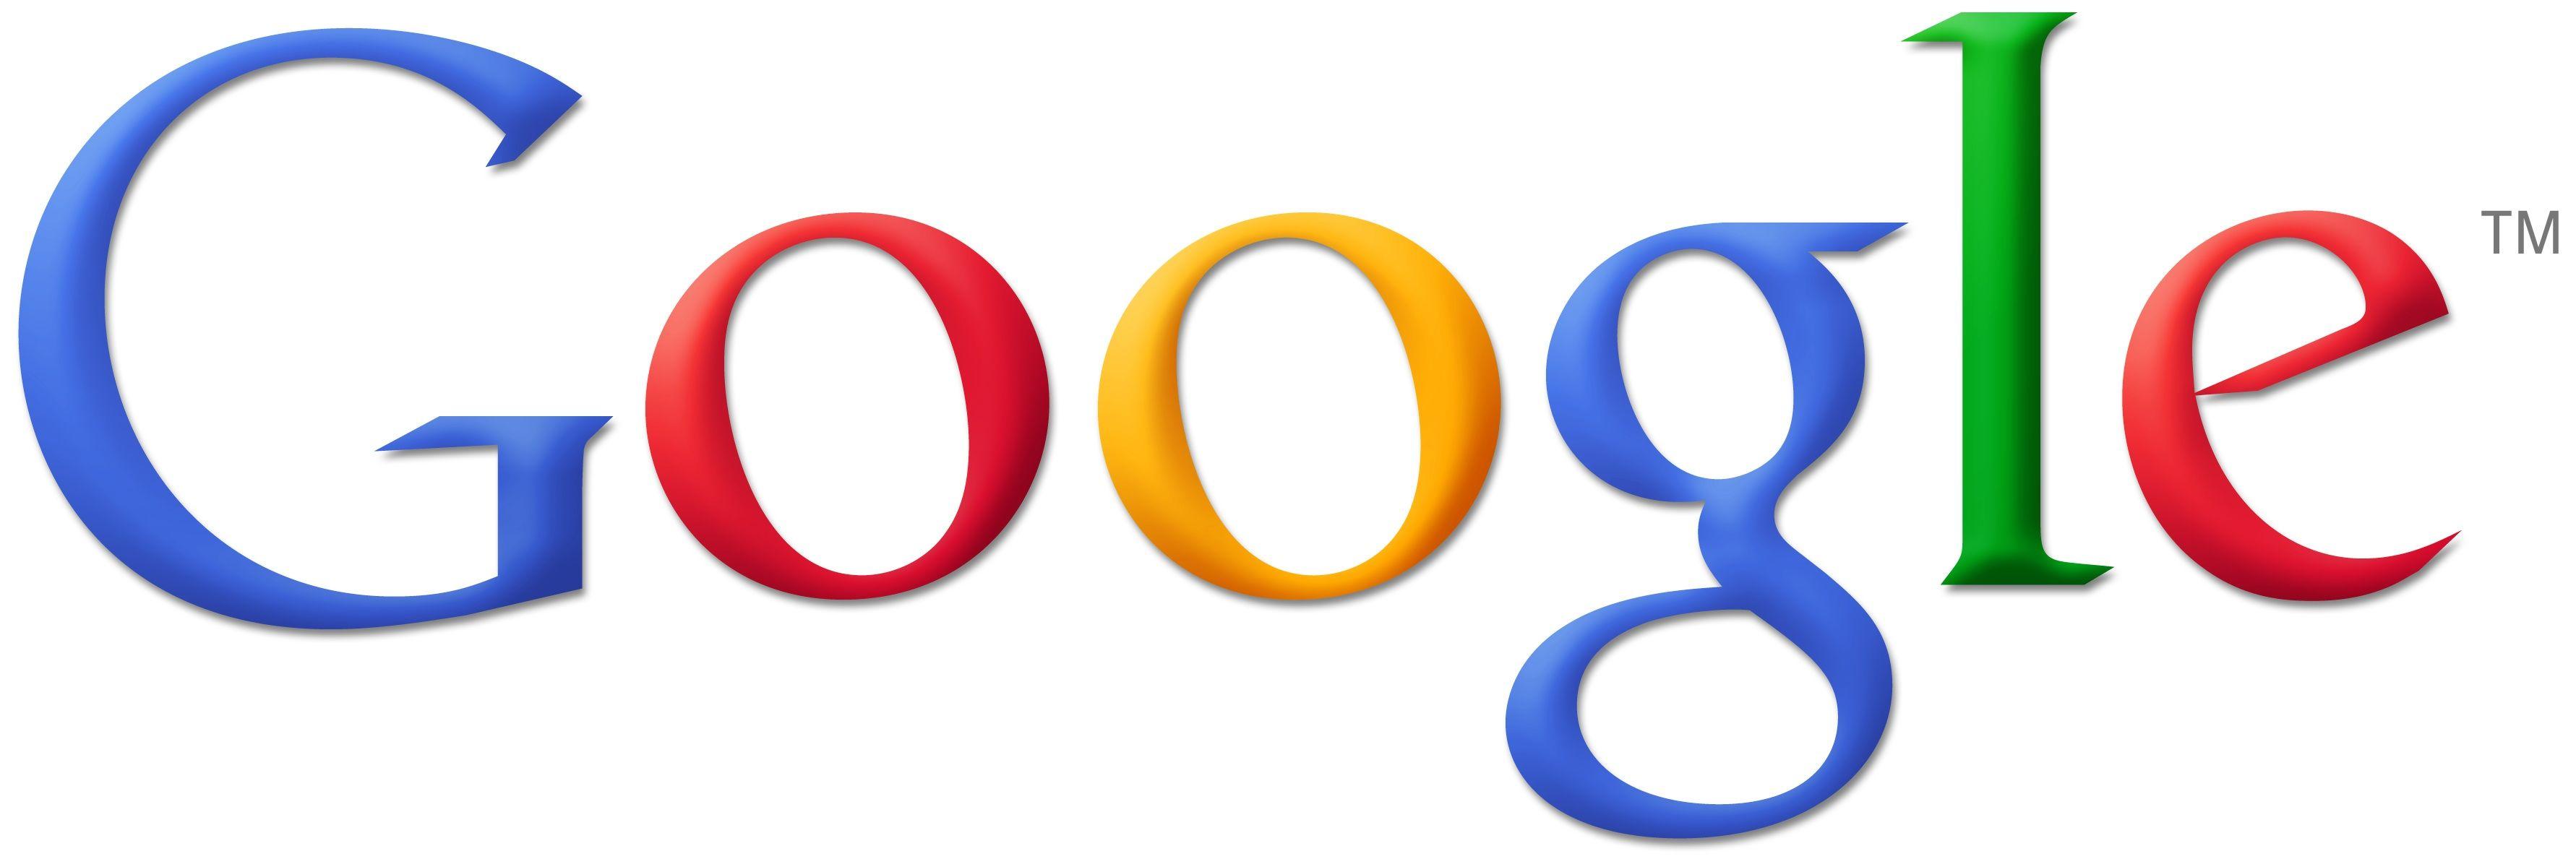 Cool Google Logo - All The Cool Tech Companies Are Rebranding, Lets Do It Too! Old ...